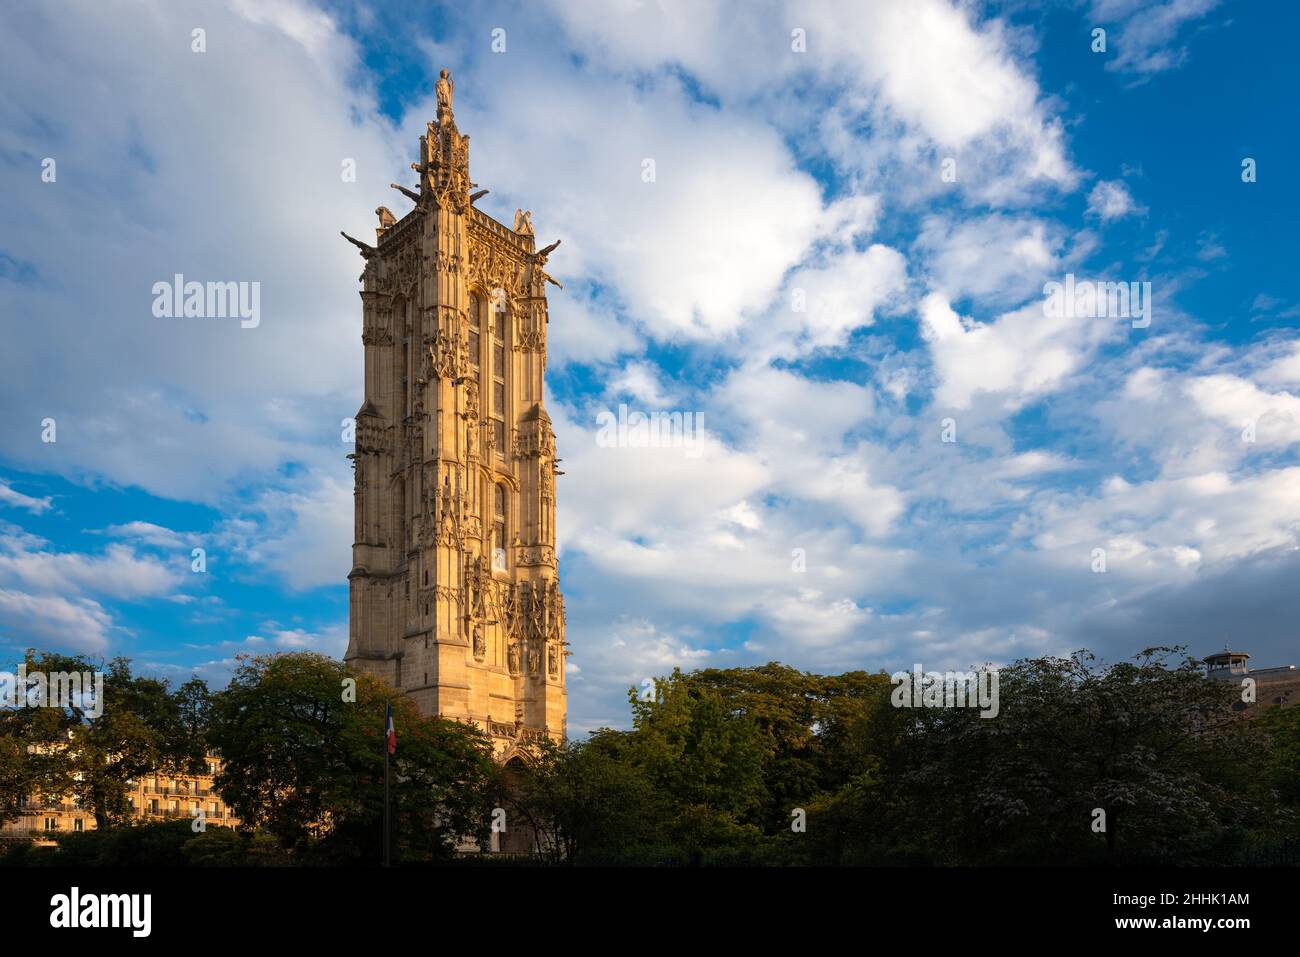 Tour Saint-Jacques (Historic Monument) in Paris at sunset. Located on the (Right Bank) it is an example ofFlamboyant Gothic architecture. France Stock Photo